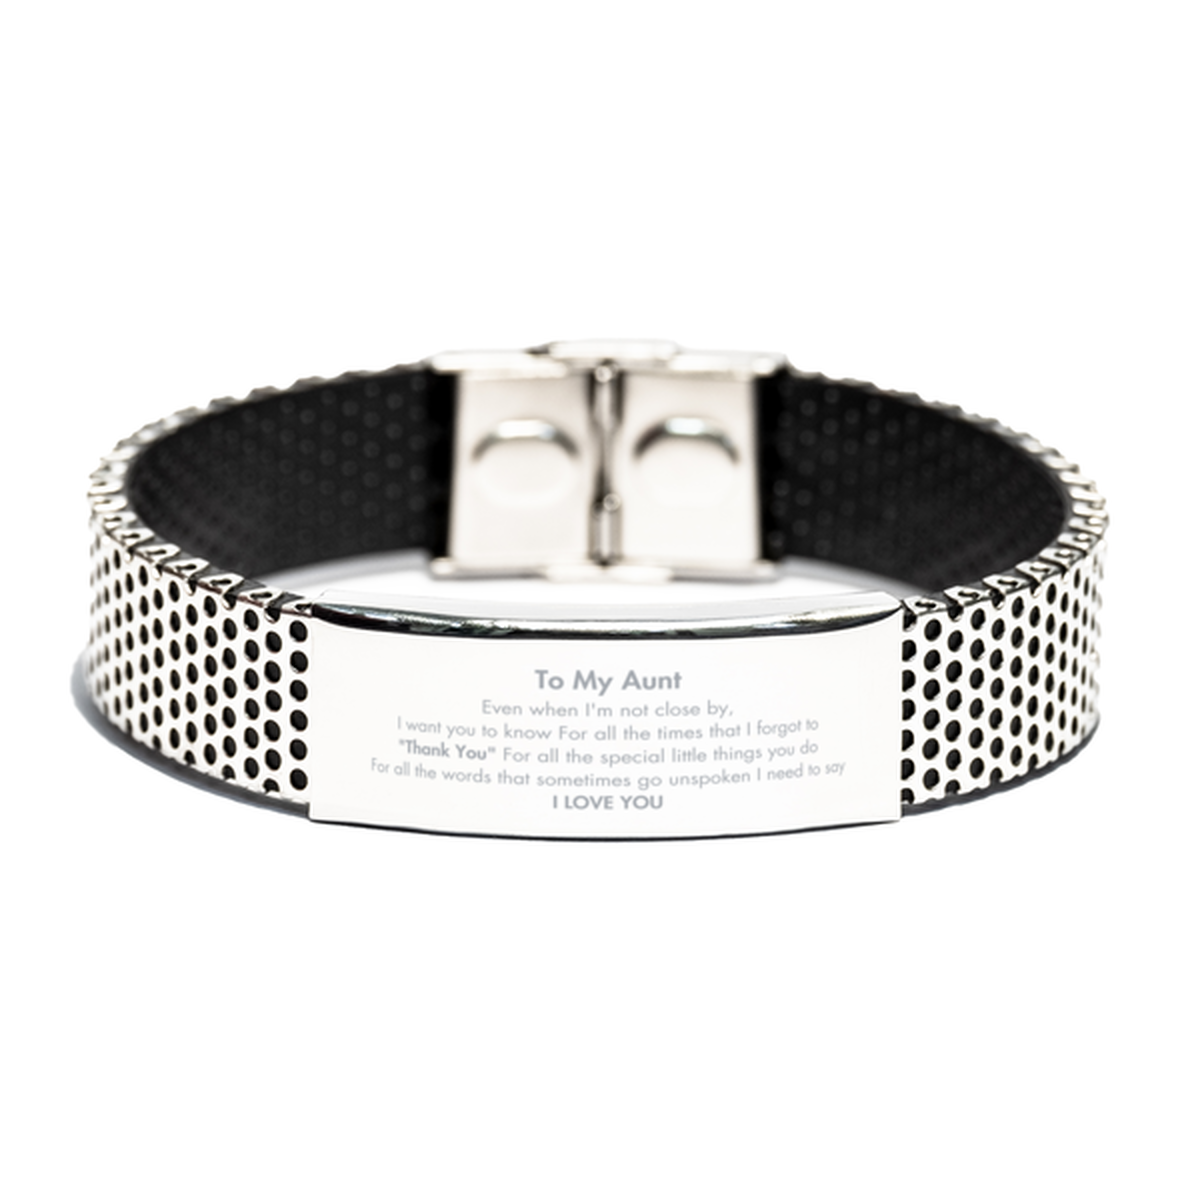 Thank You Gifts for Aunt, Keepsake Stainless Steel Bracelet Gifts for Aunt Birthday Mother's day Father's Day Aunt For all the words That sometimes go unspoken I need to say I LOVE YOU